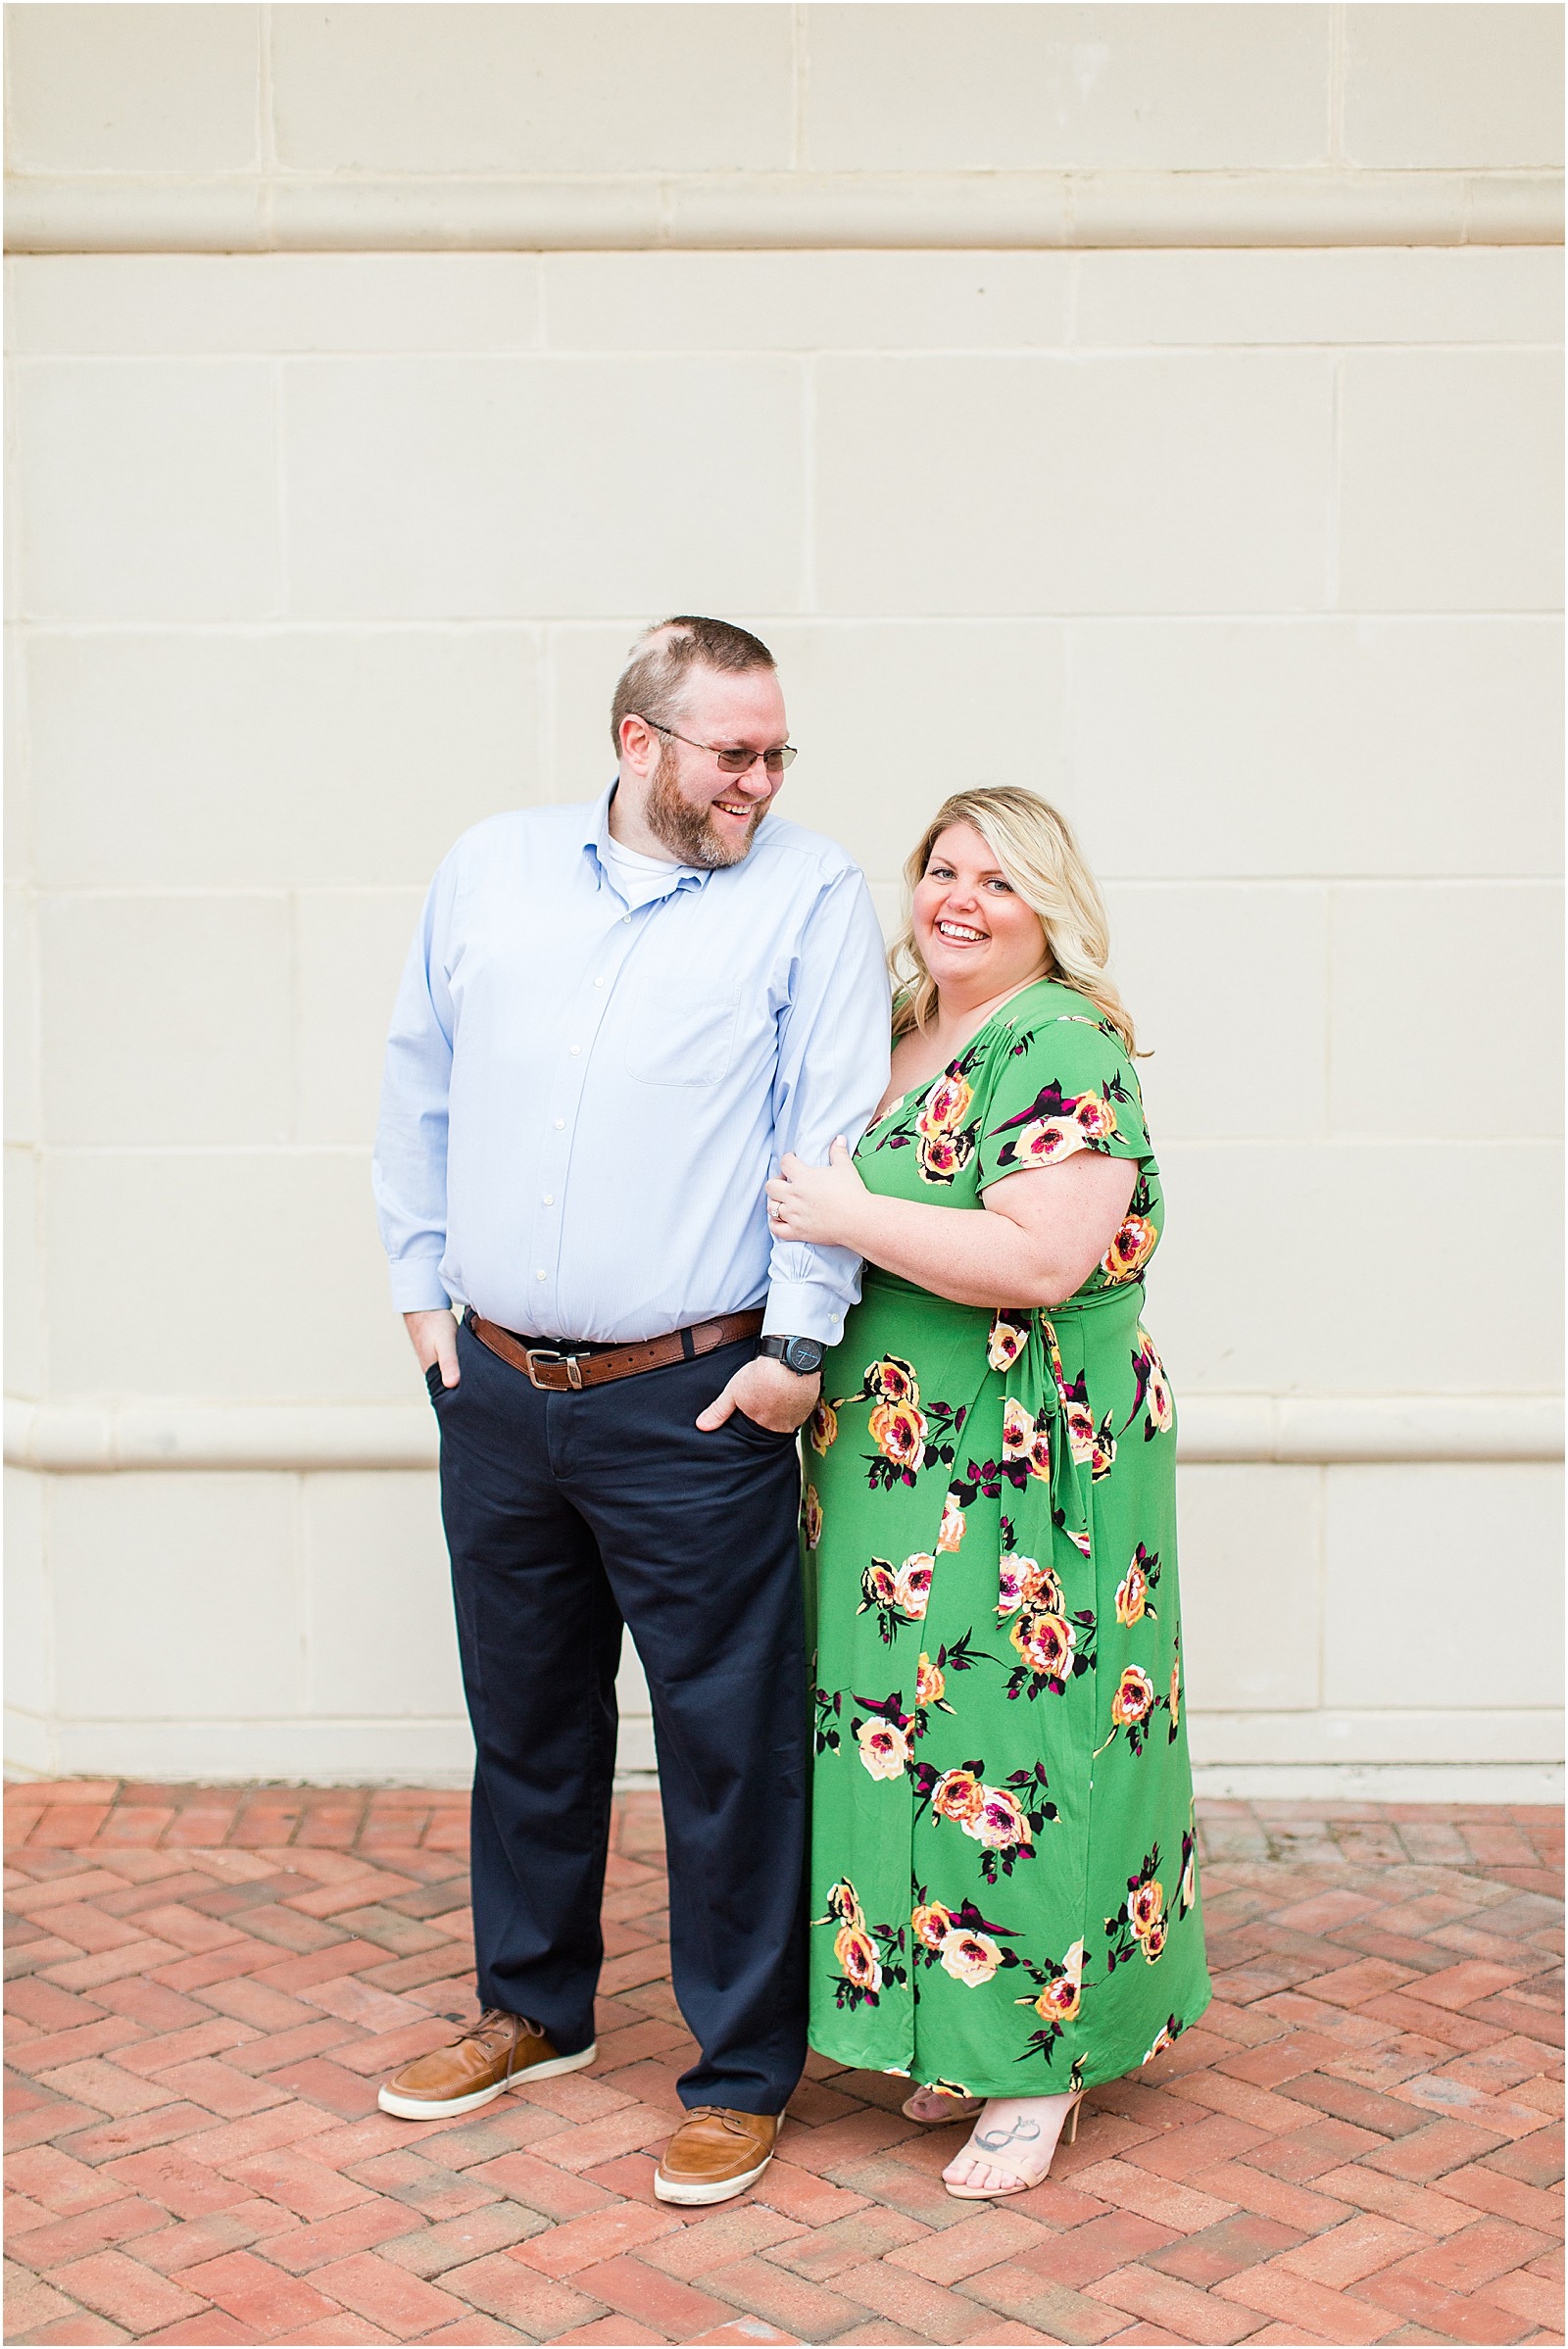 A Downtown Owensboro Engagement Session | Brittany and Neil | Engaged | | 0011.jpg